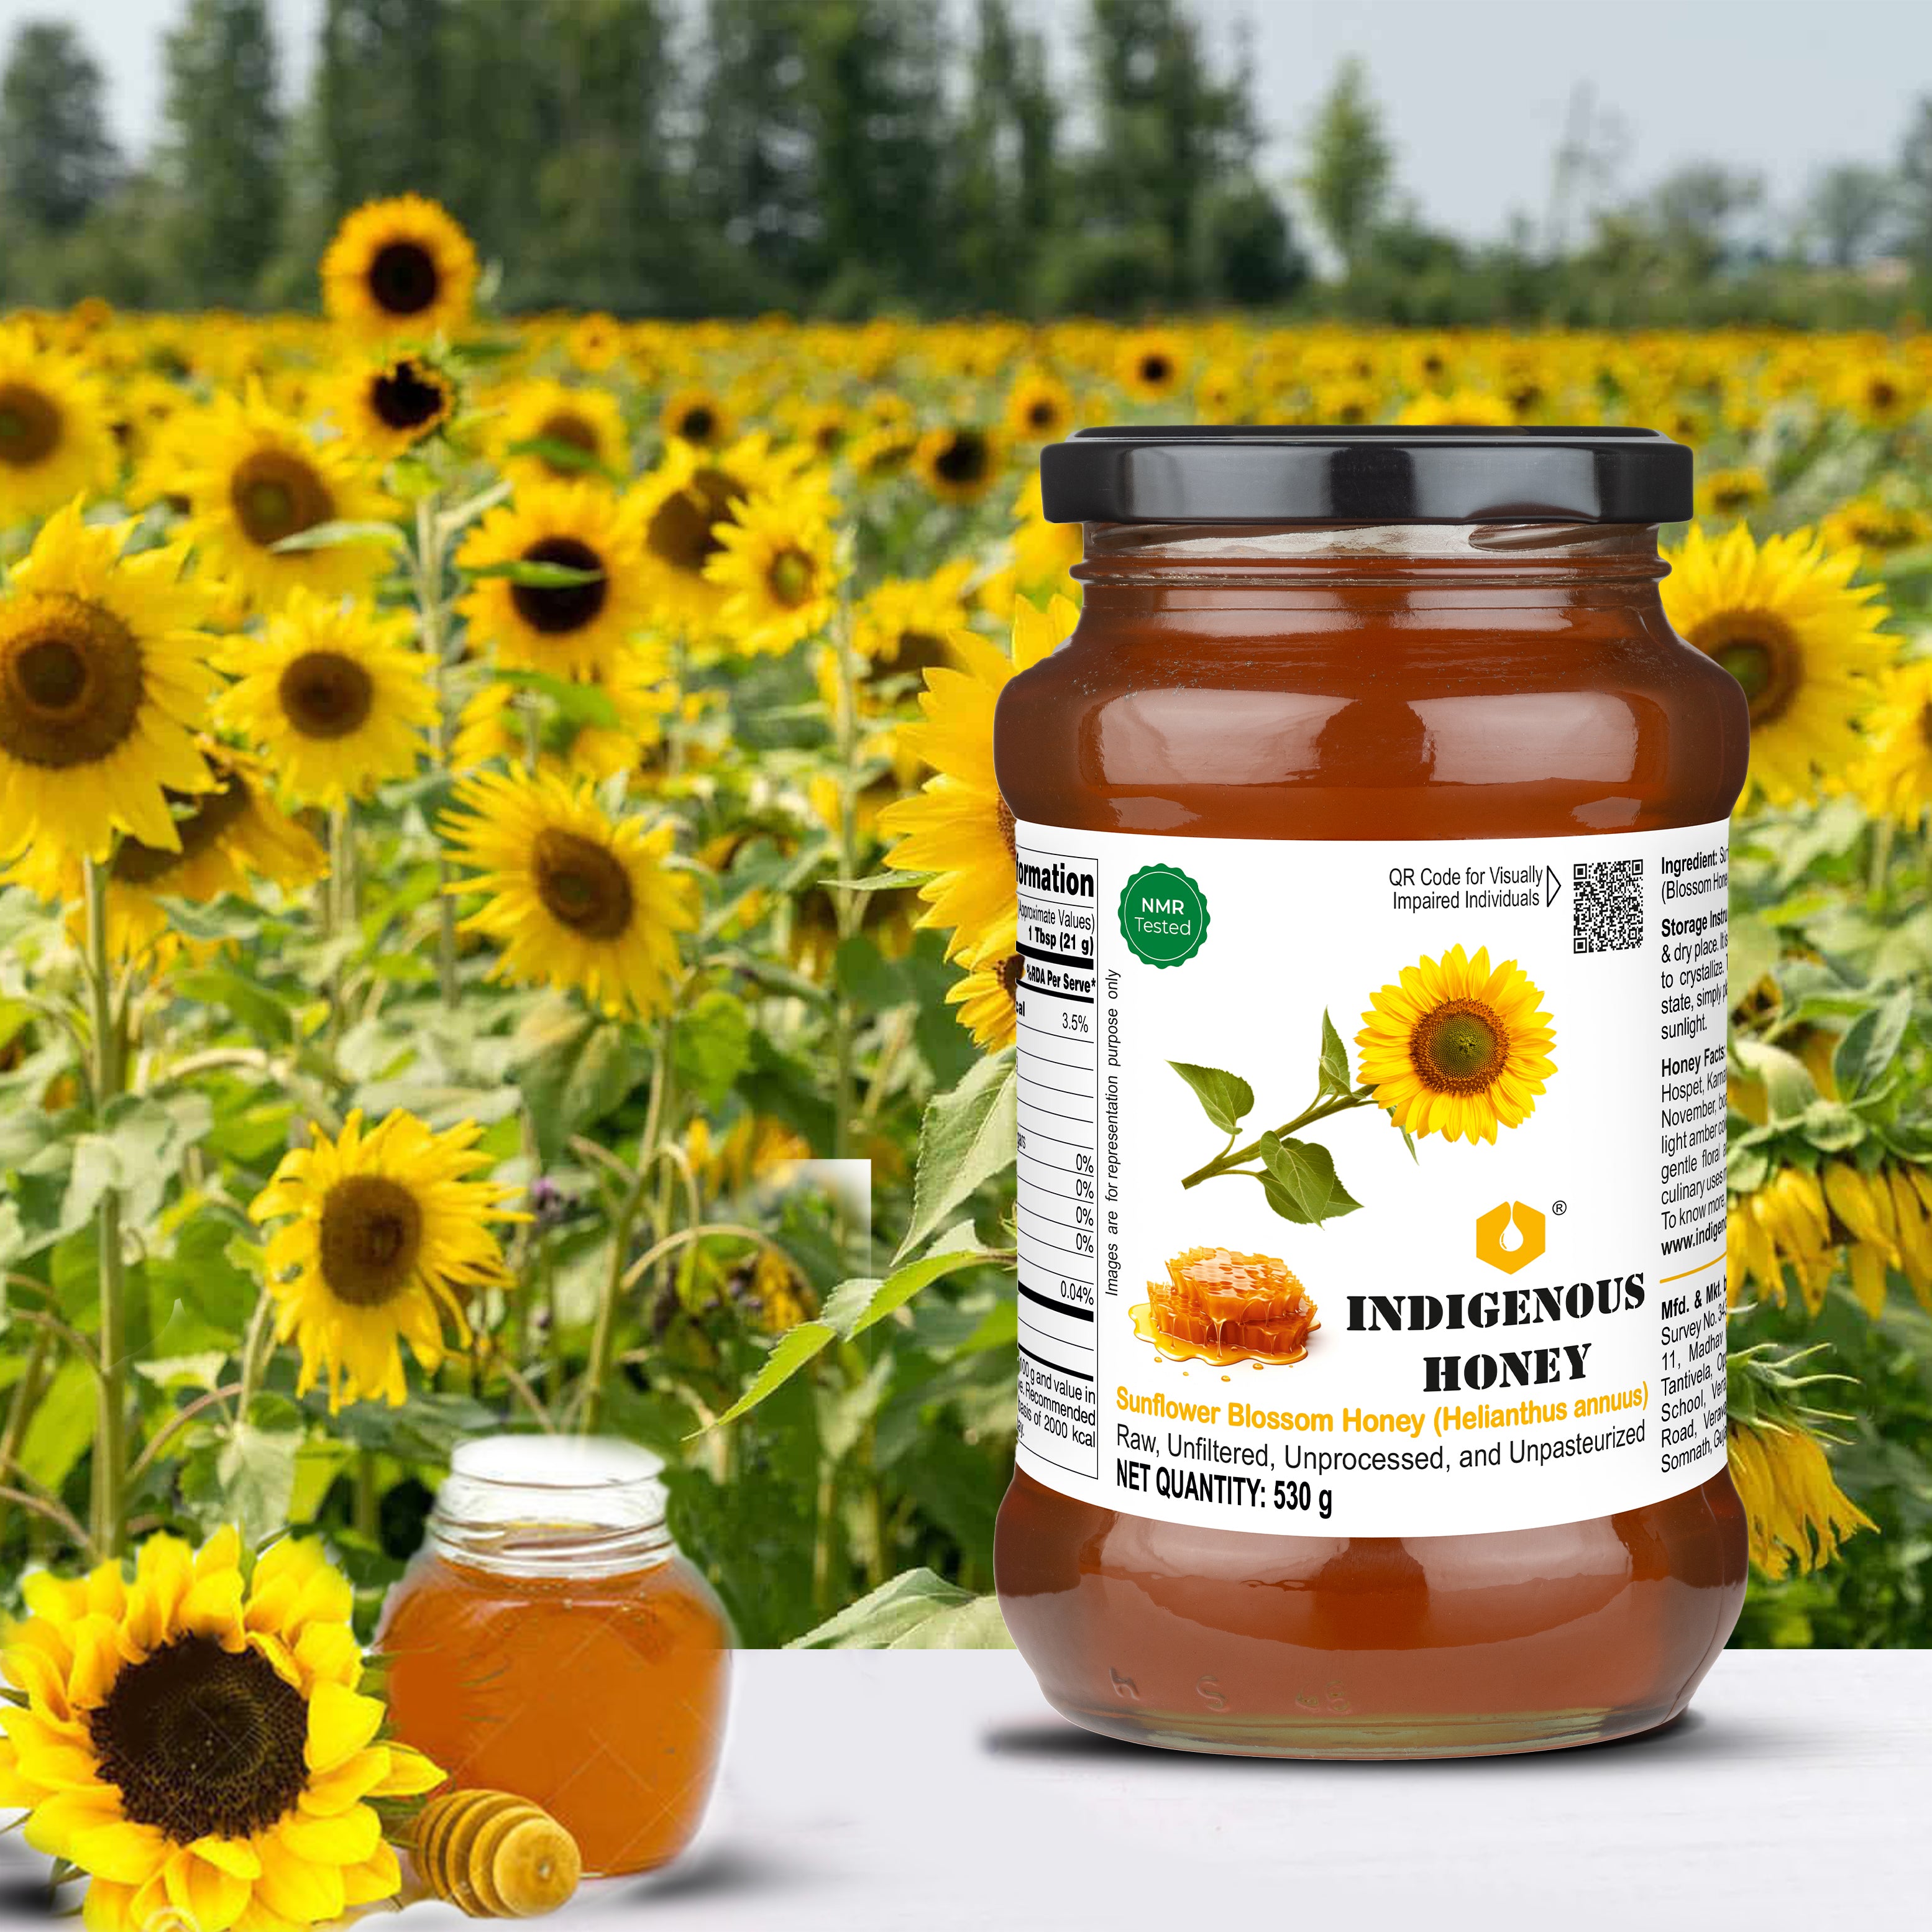 Natural and Unprocessed Sunflower Blossom Honey